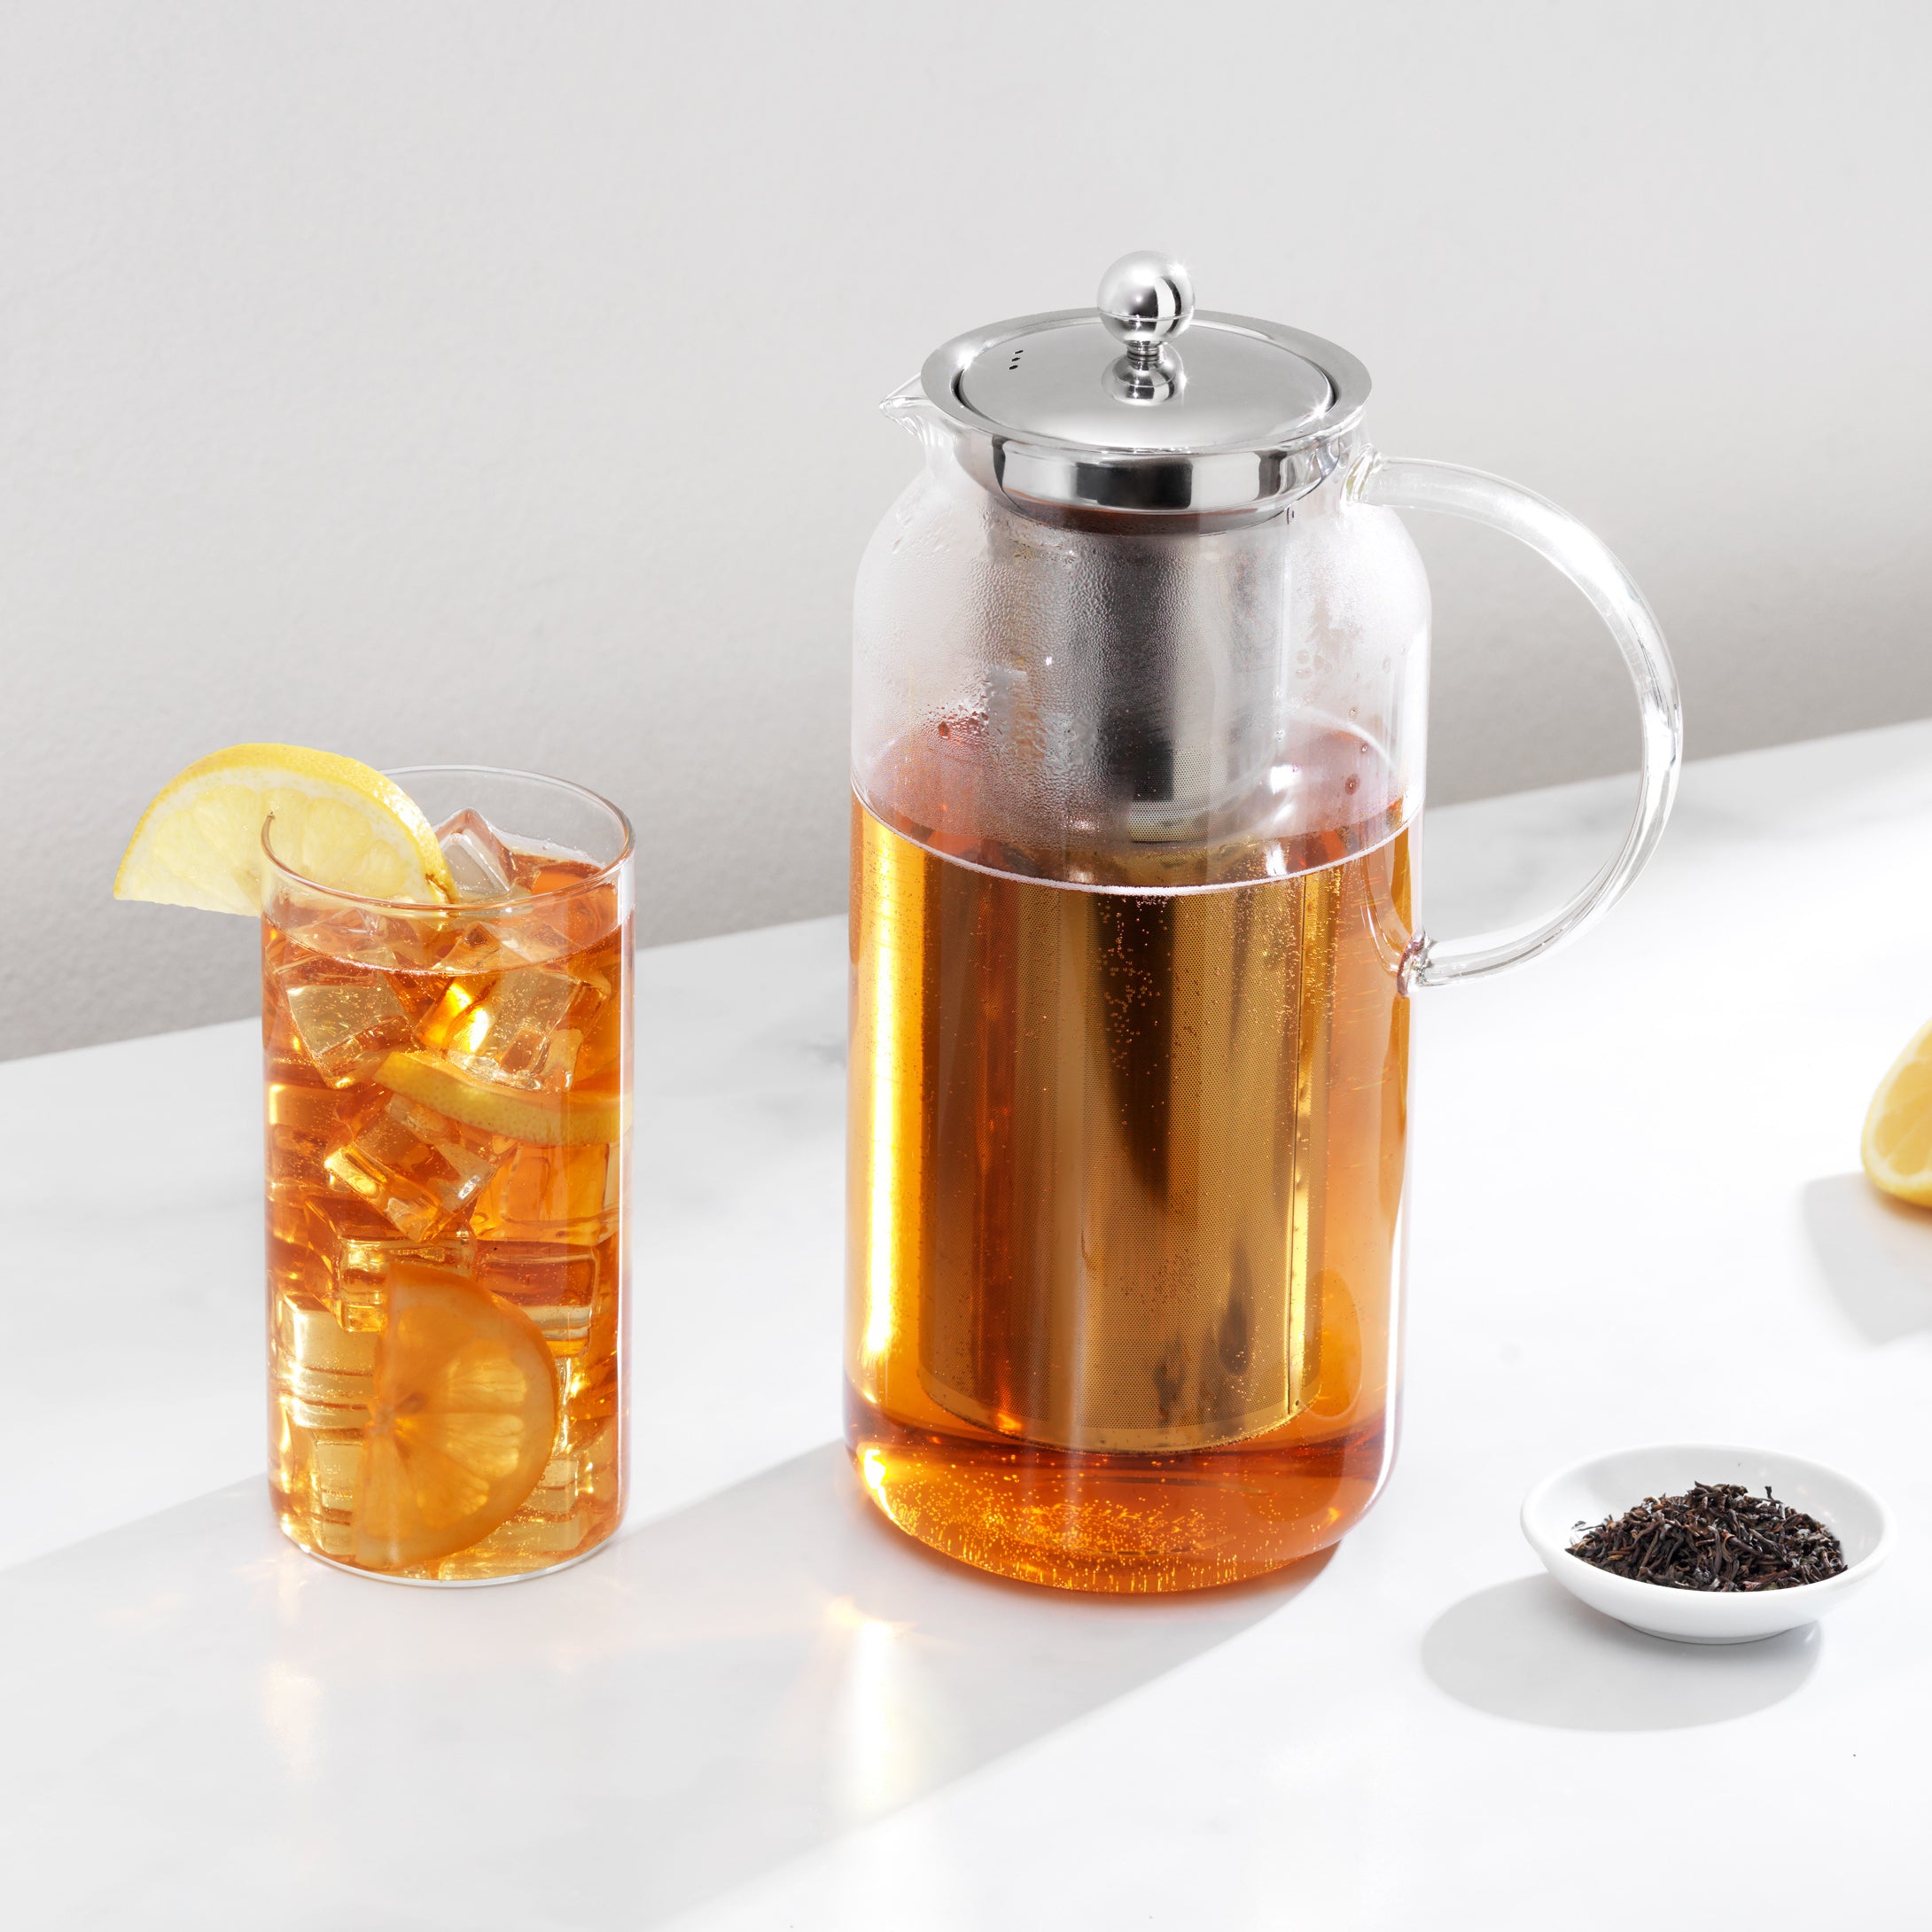 Public Goods Glass Infuser Pitcher - 1 ct at AnyDen